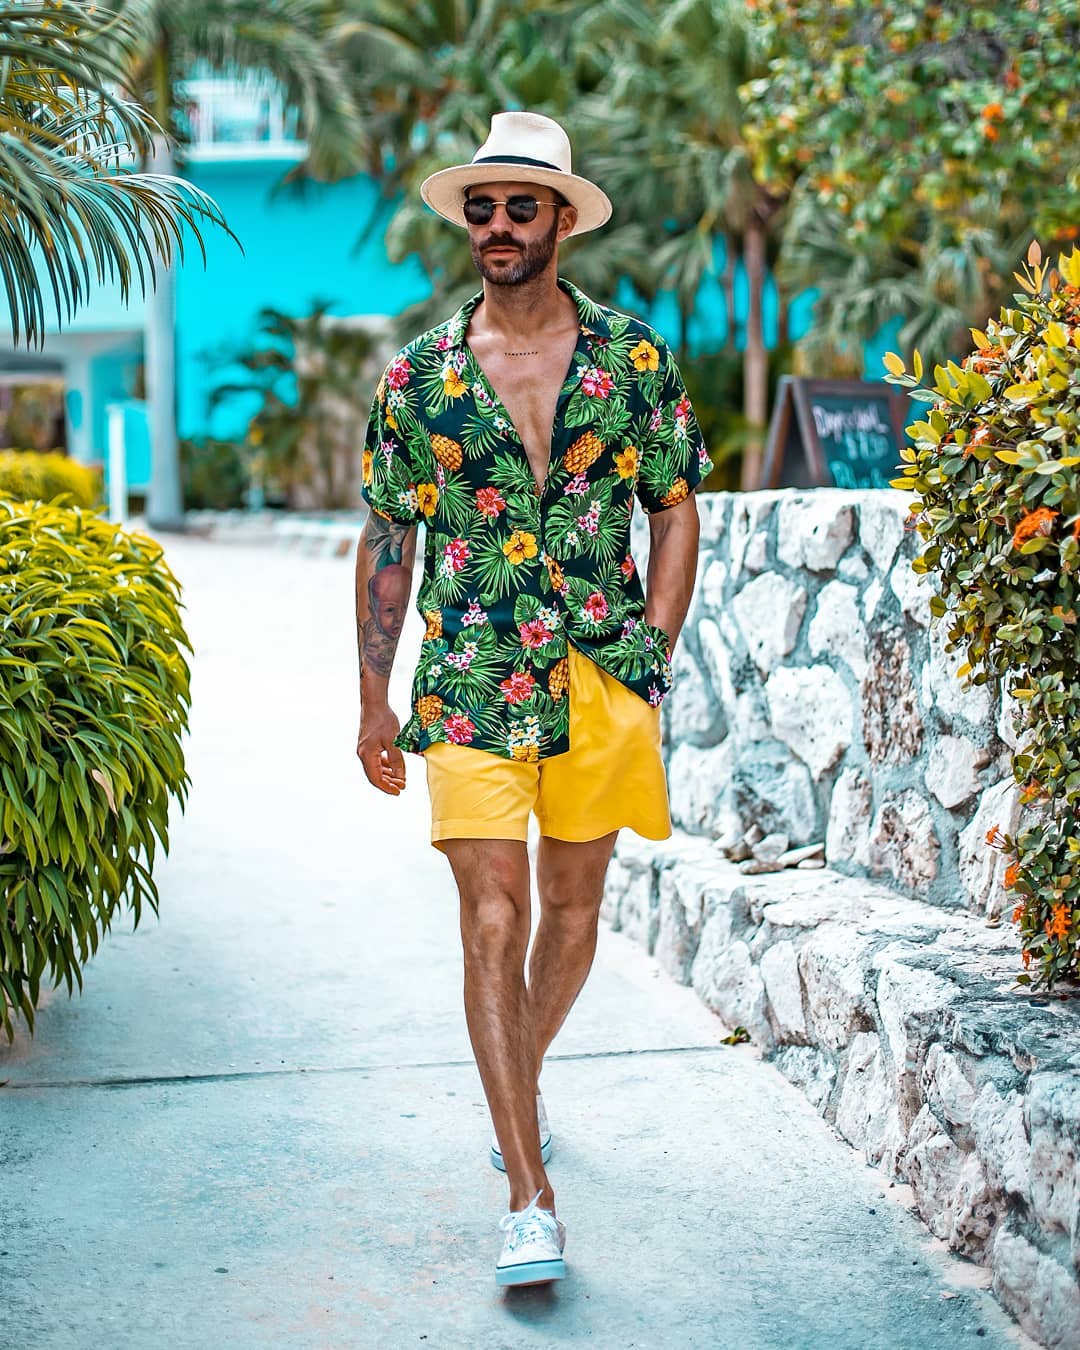 10 Ways to Wear Floral Shirt this Summer - LIFESTYLENUTS